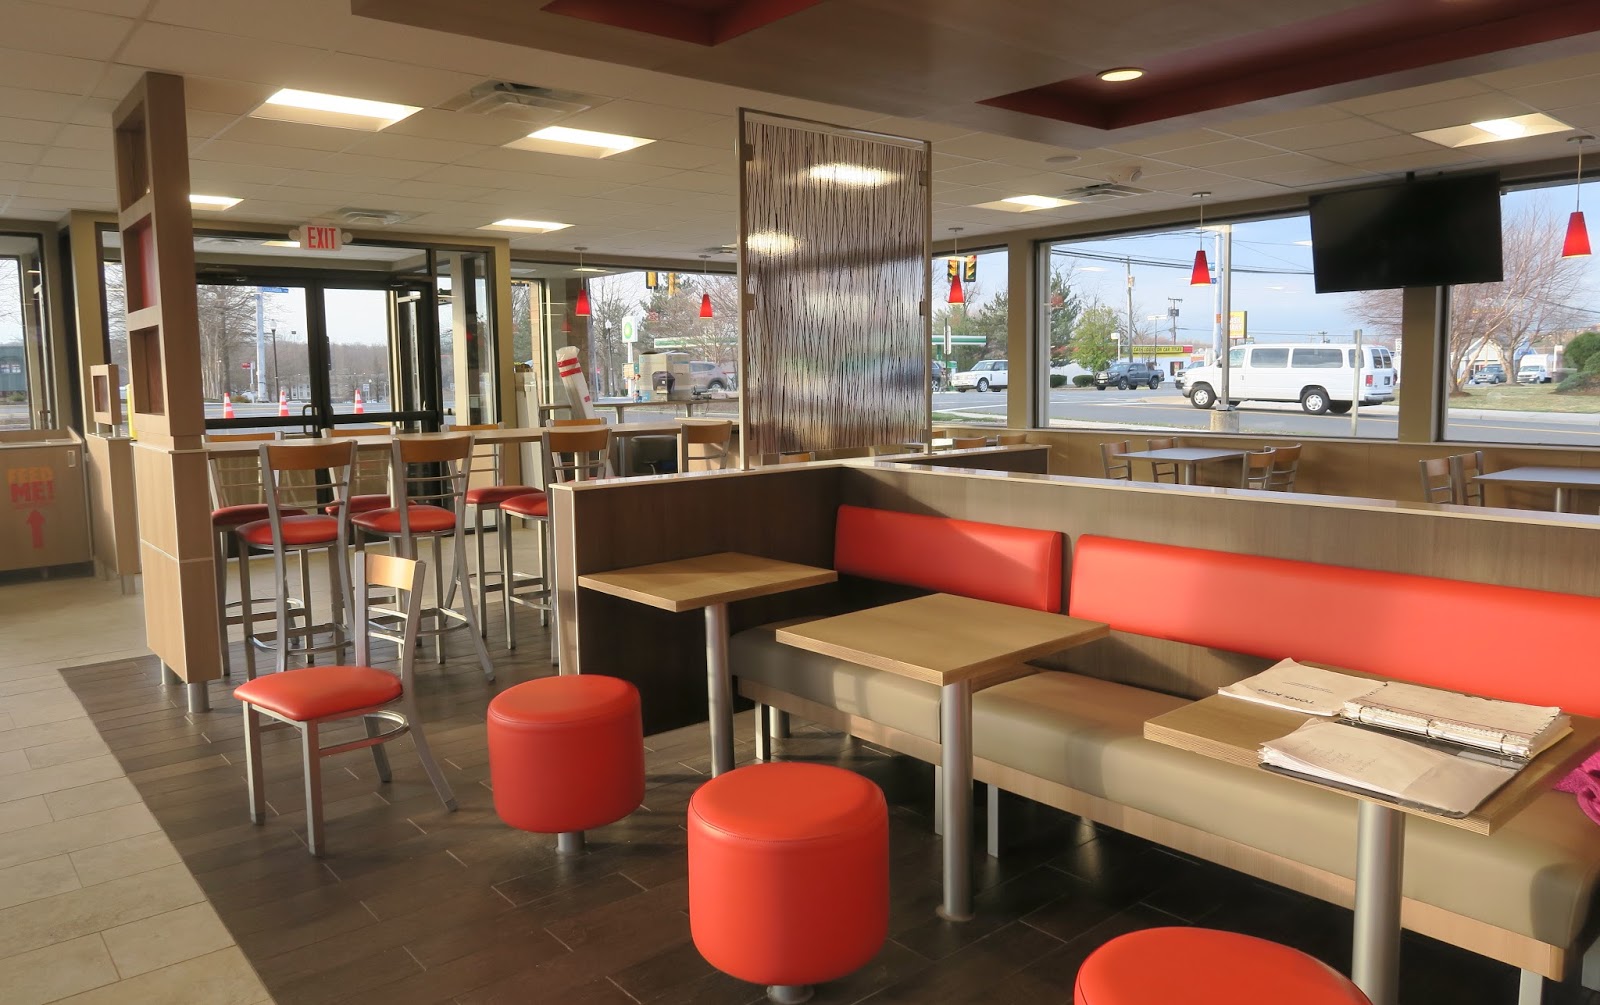 Annandale Burger King to reopen this week.